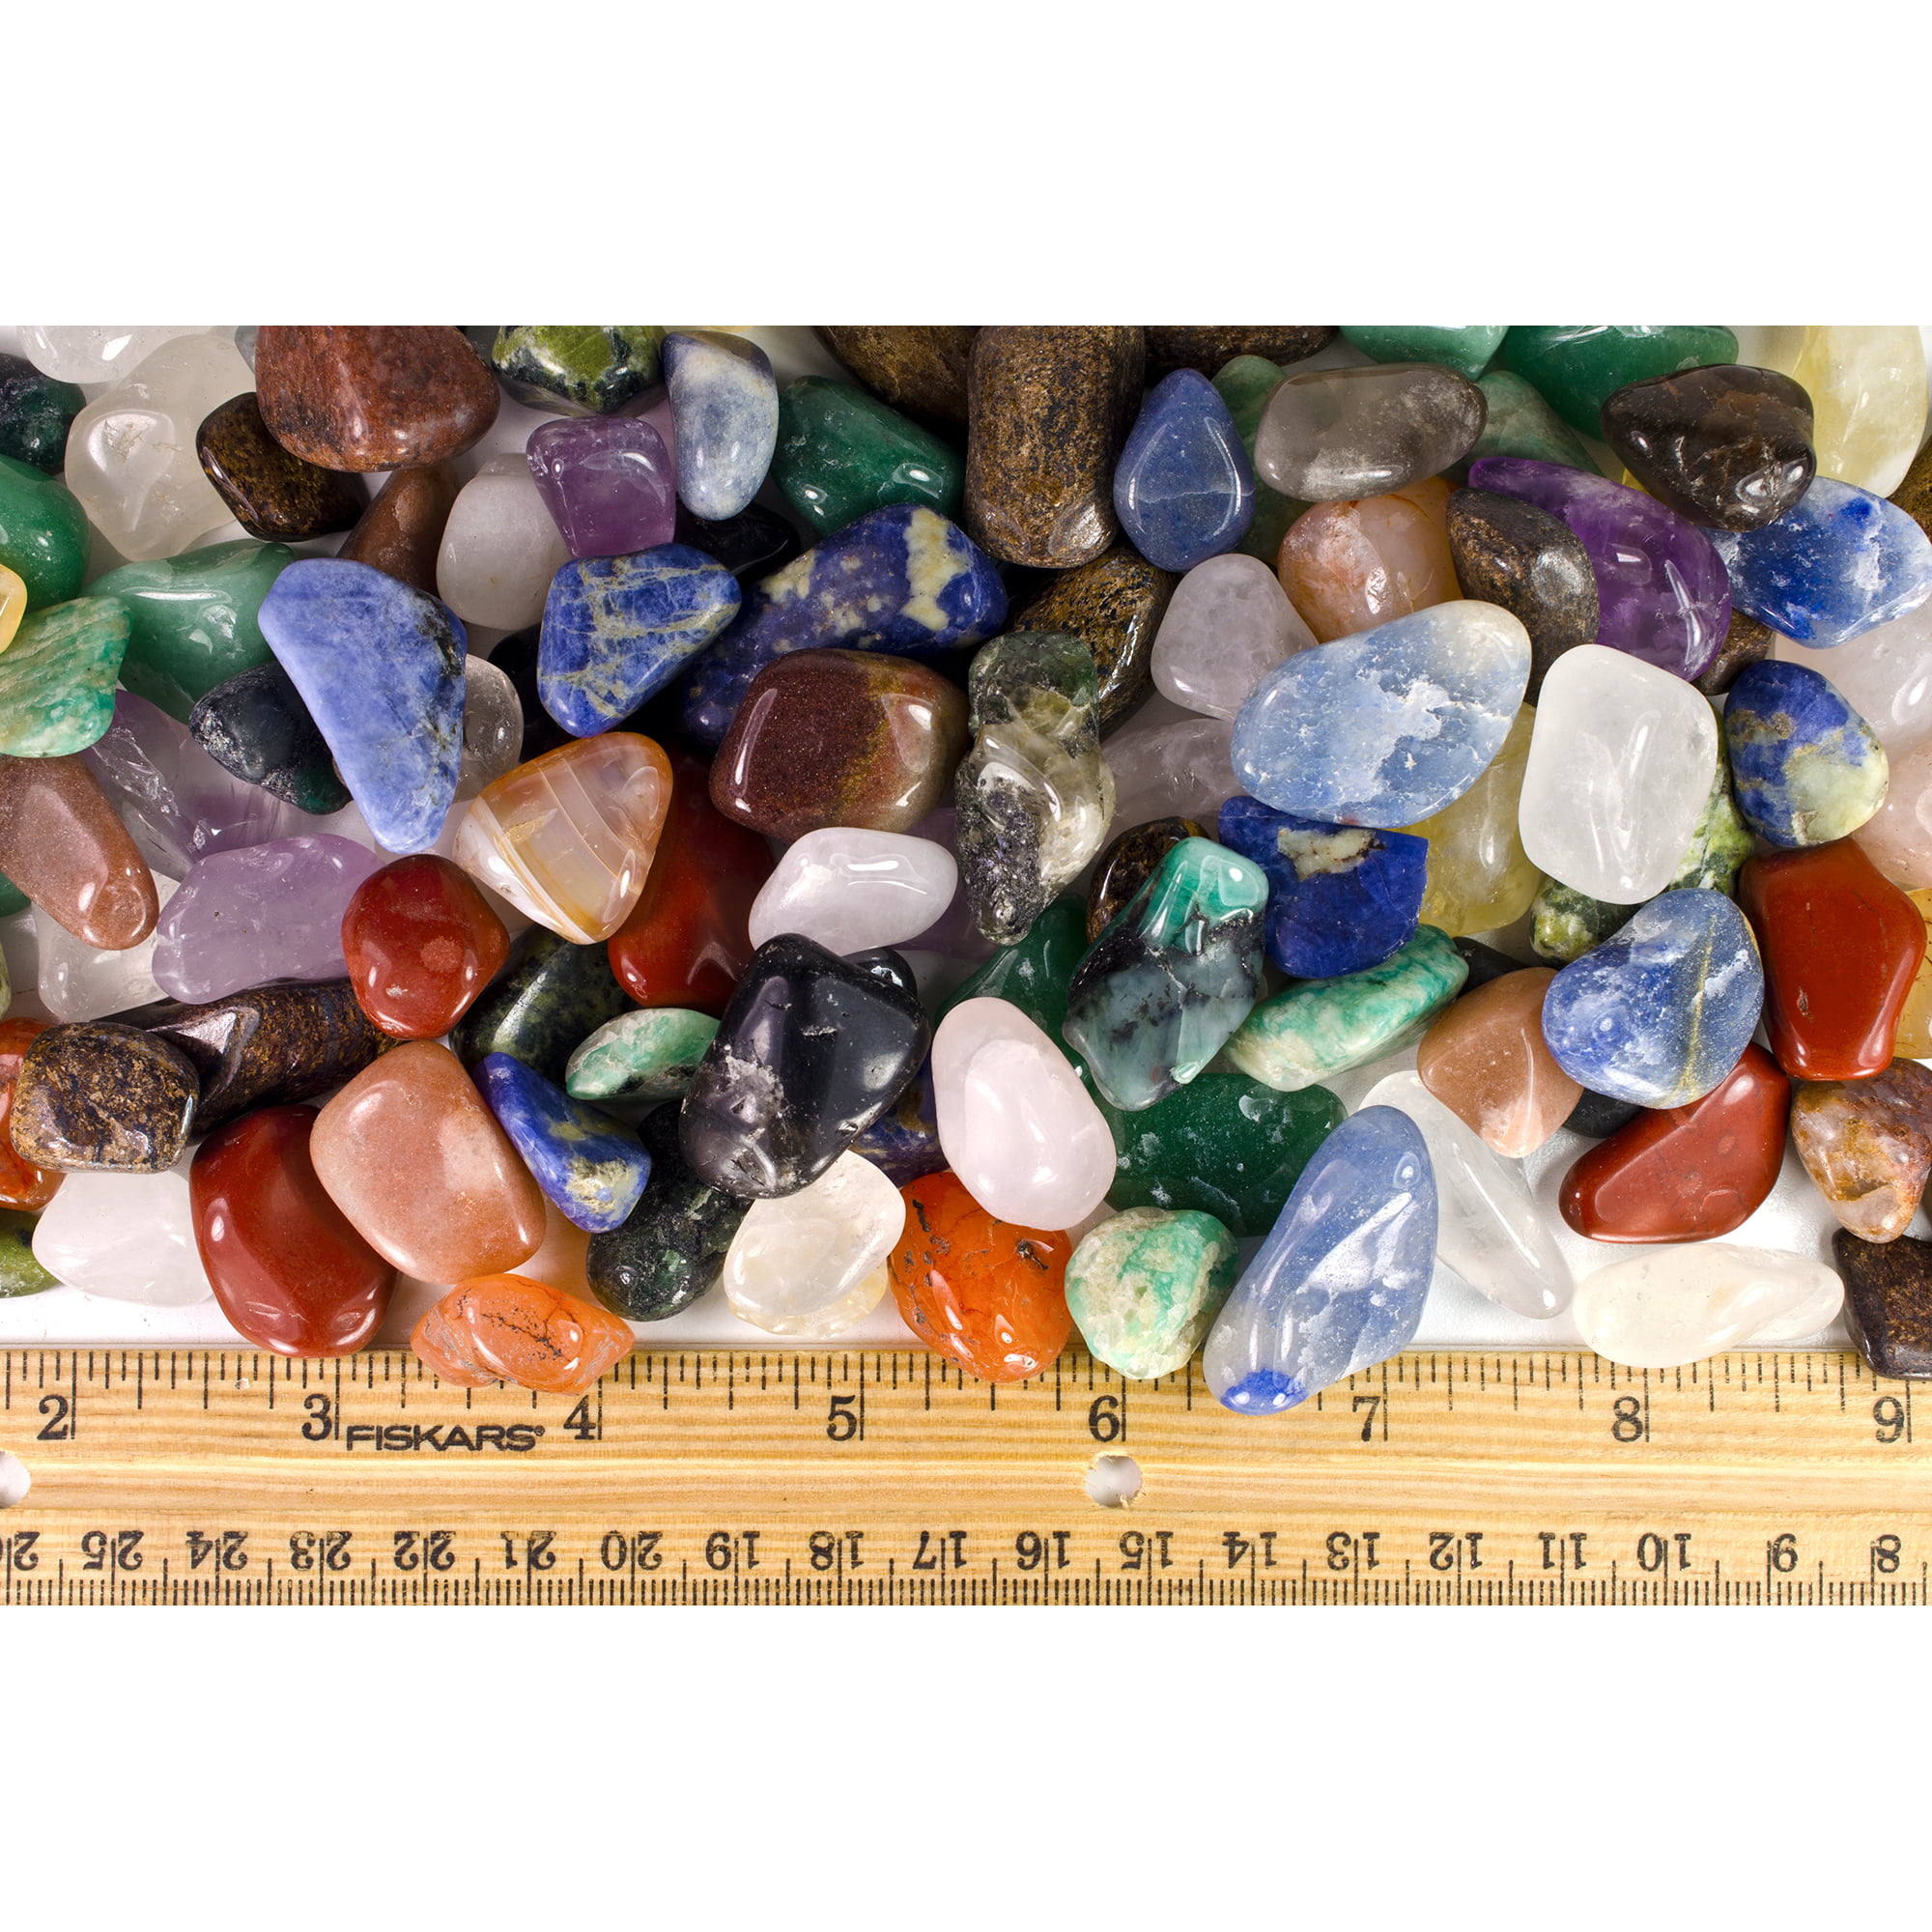 Crafts Natural Earth Mined Brazilian Reiki Fantasia Materials: 1 lb Tumbled Blue Quartz Chip Stones with ID Card Jewelry Making Home Decoration and More! Not China Polished Rocks for Art